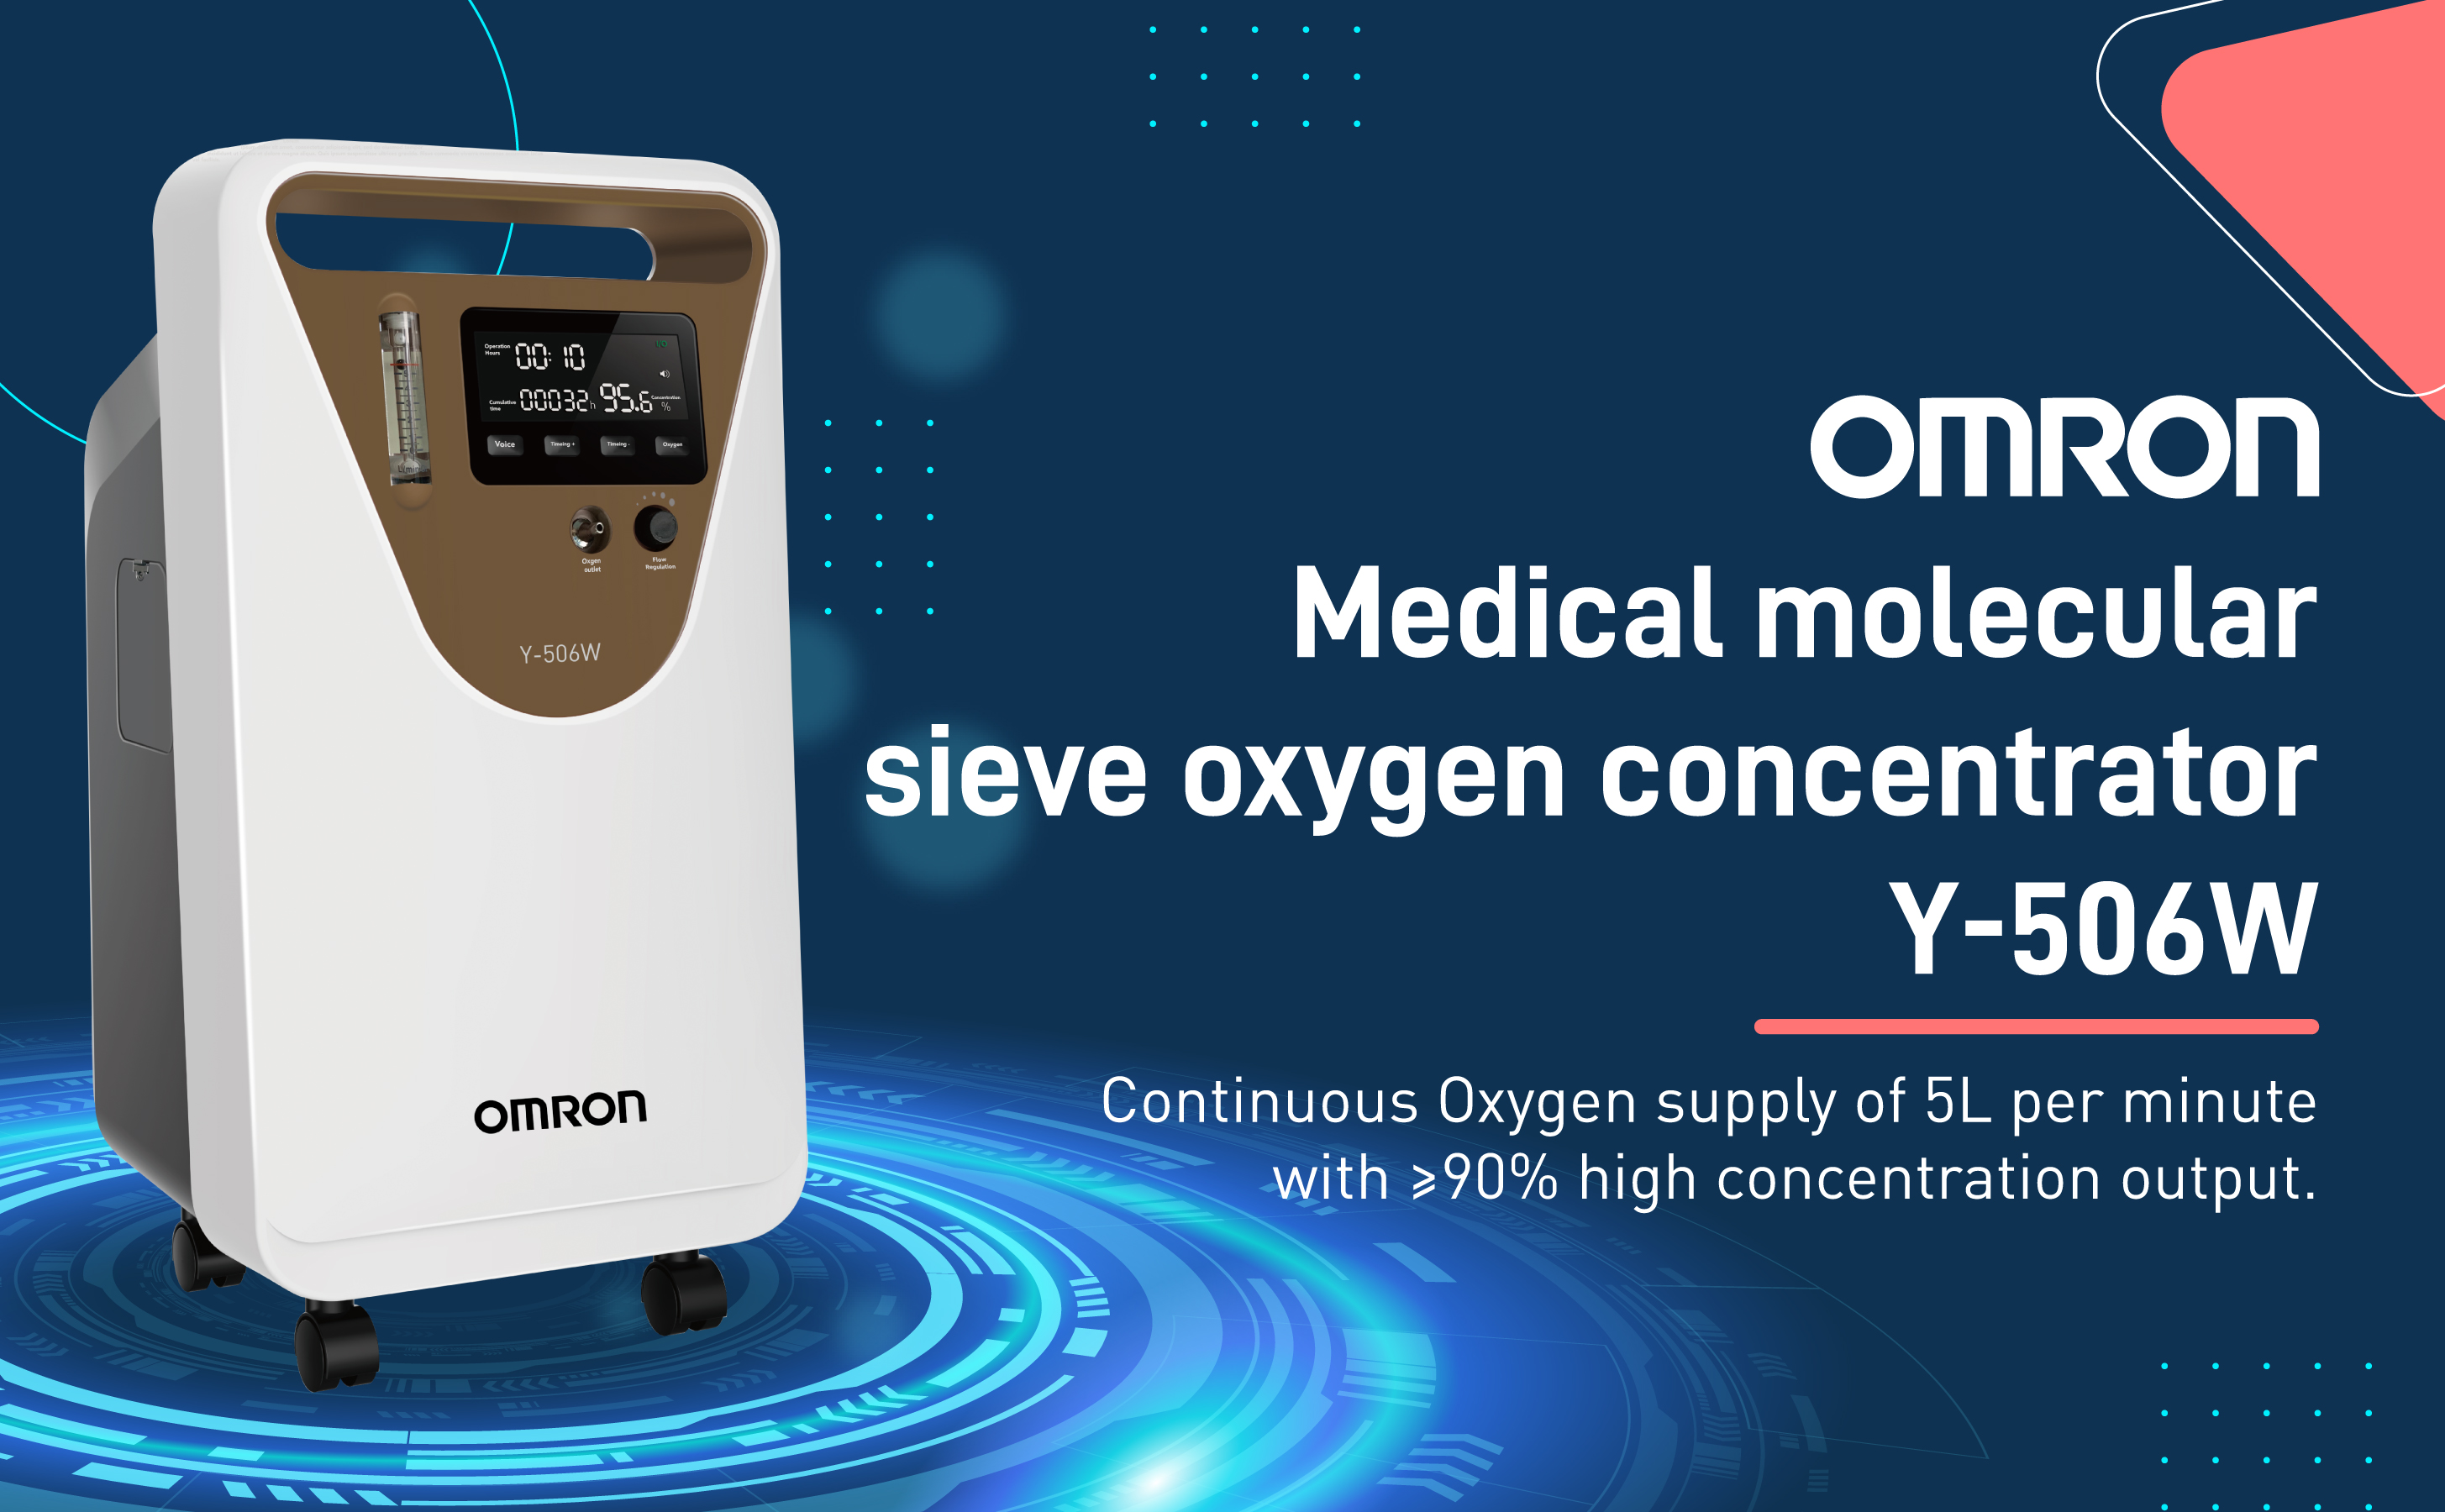 OMRON Healthcare introduces high-quality medical molecular sieve Oxygen concentrator